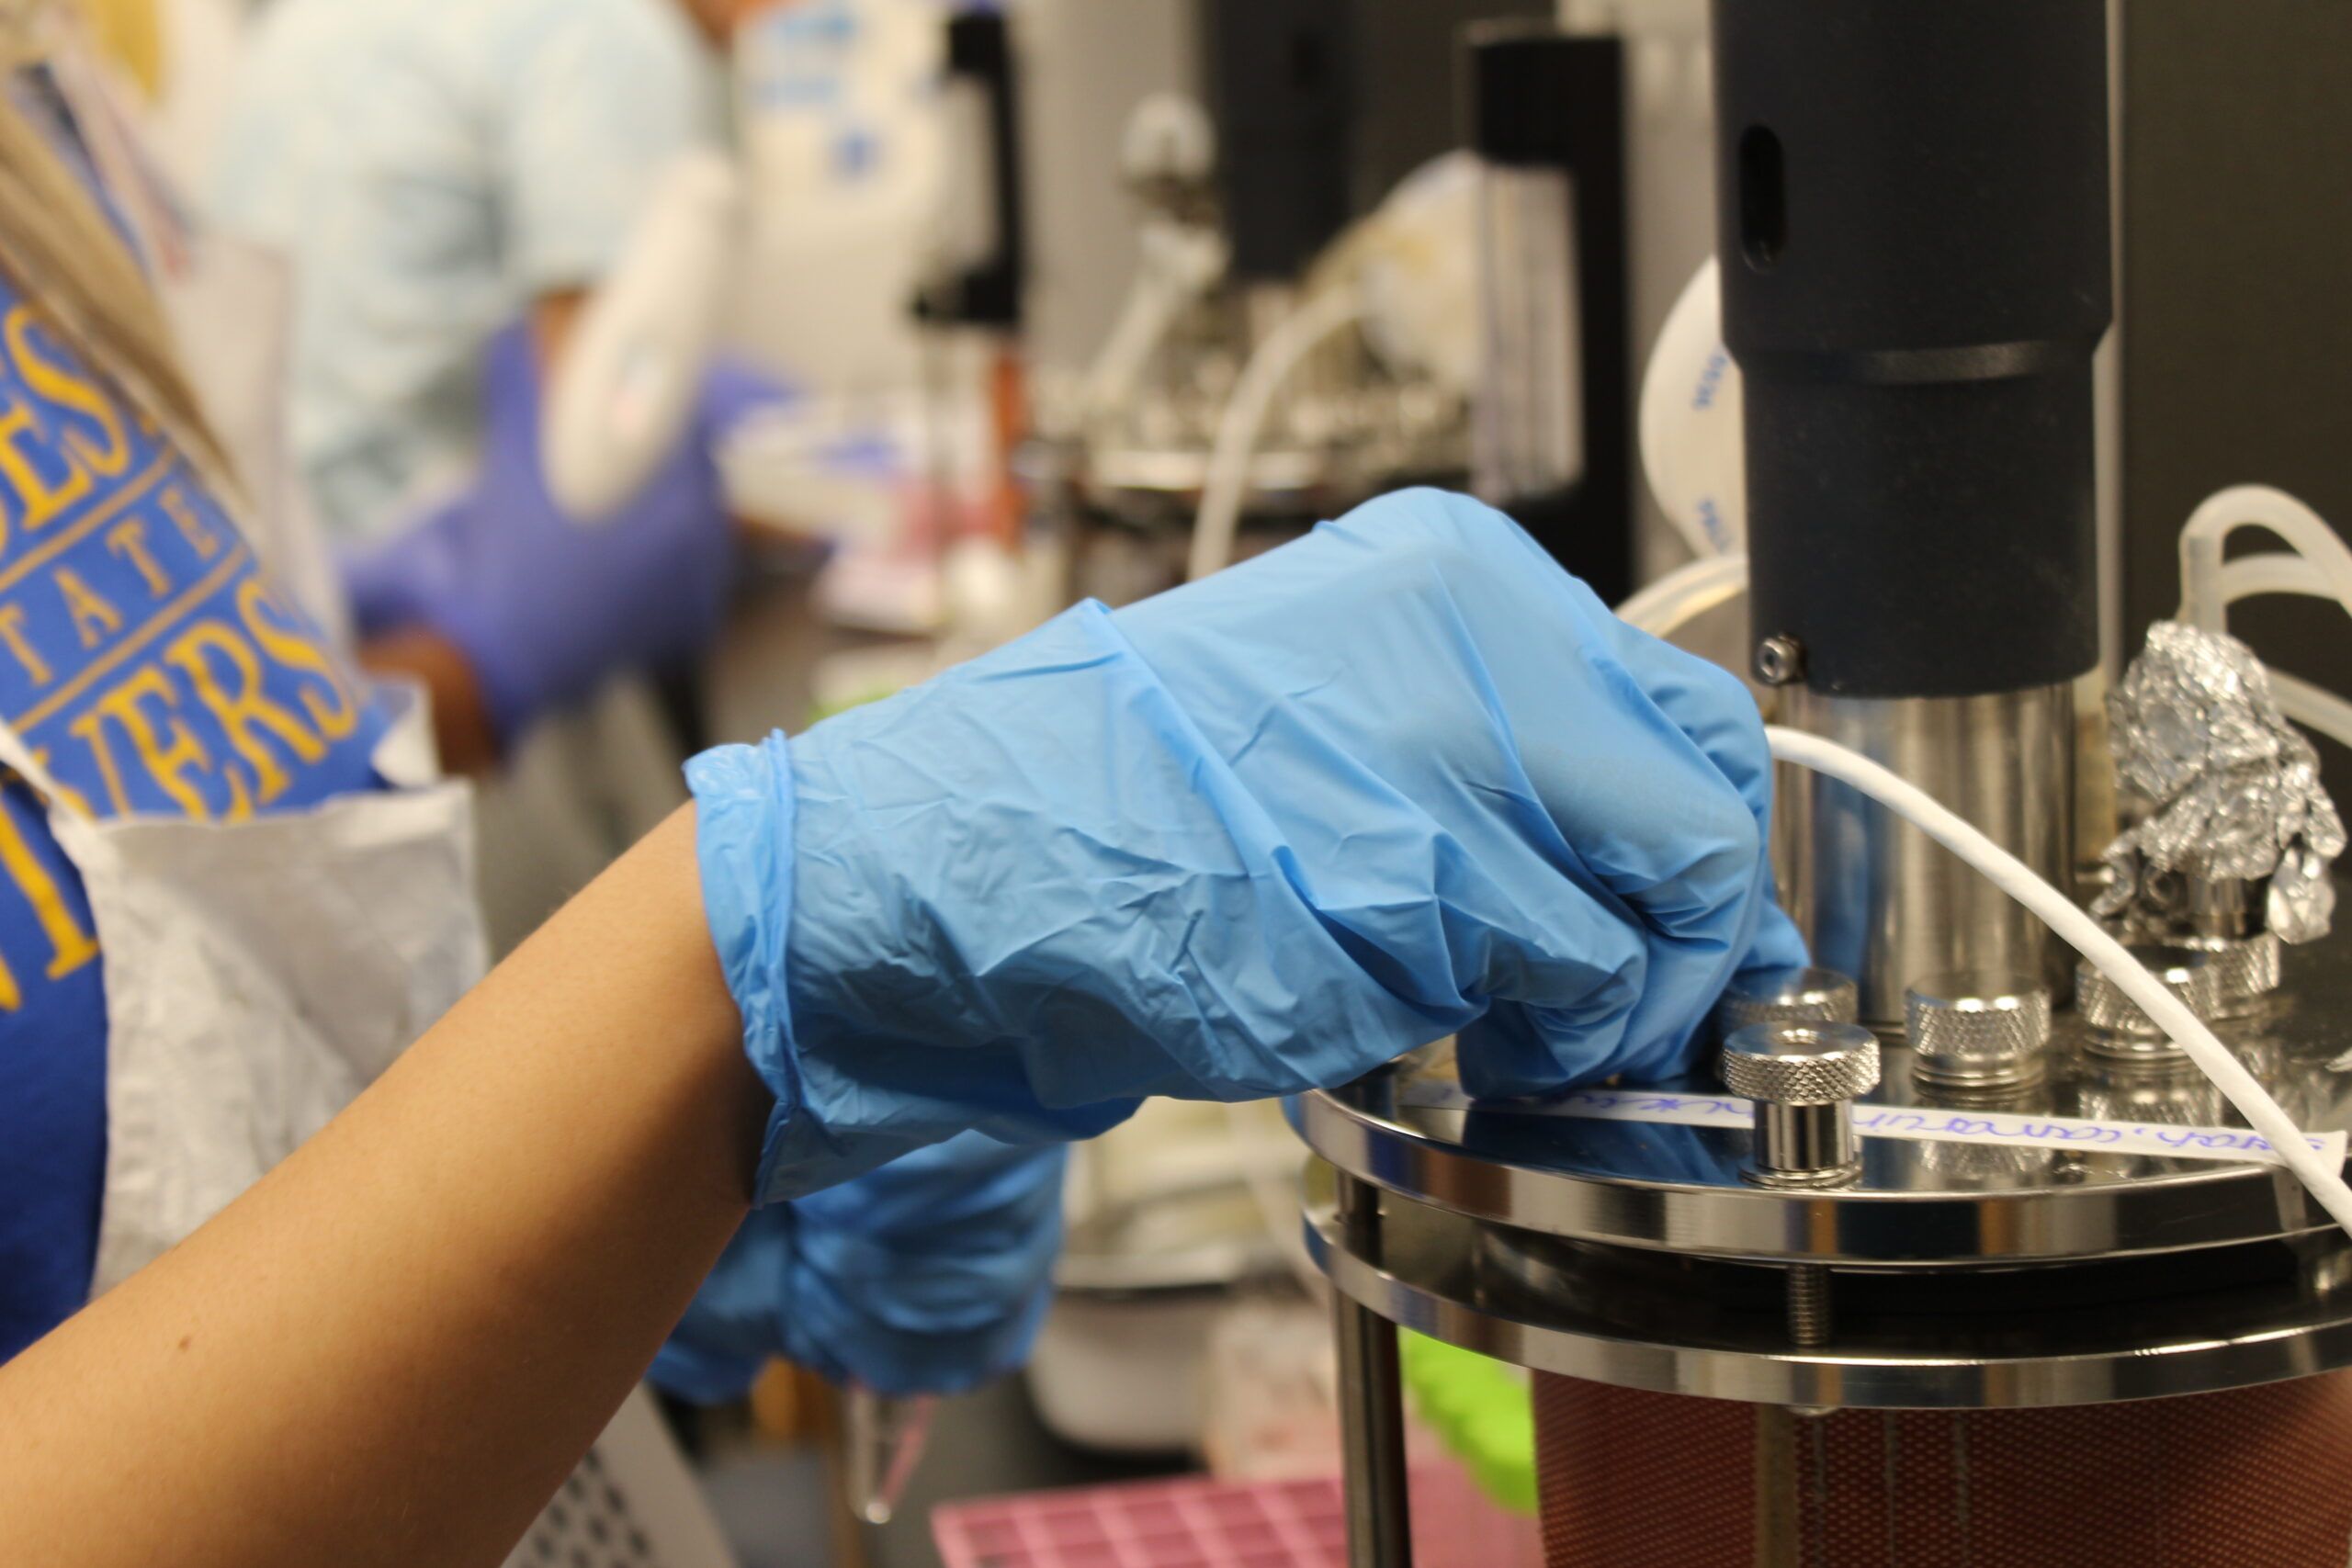 University labs outfitted with industry-level equipment through new grant